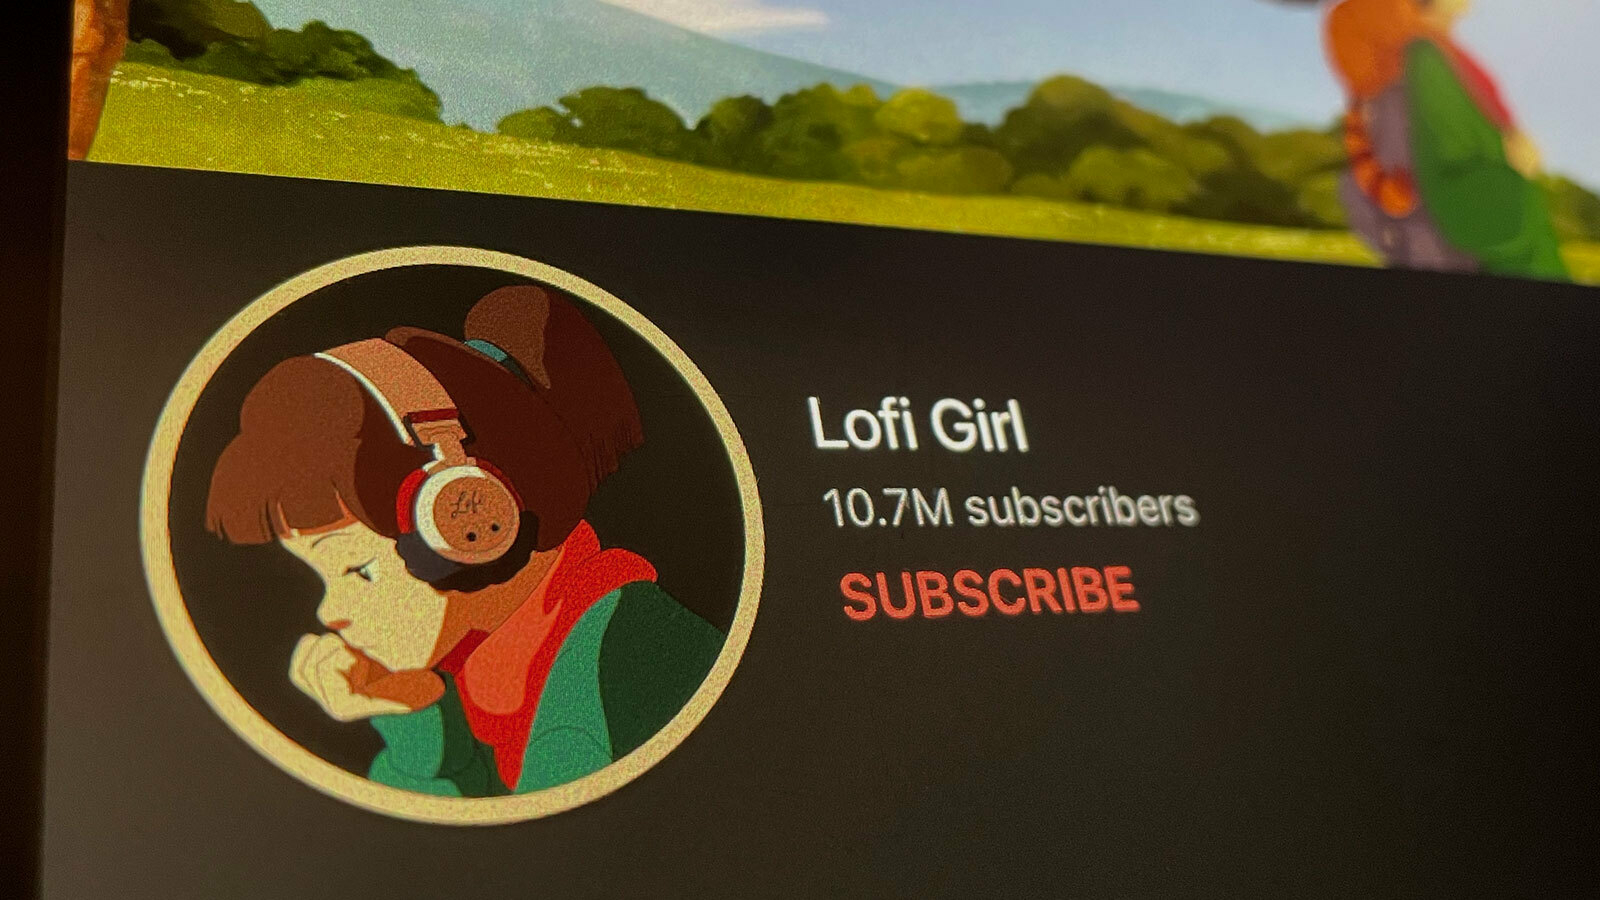 YouTube ends Lofi Girl two-year-old music stream over fake DMCA warning